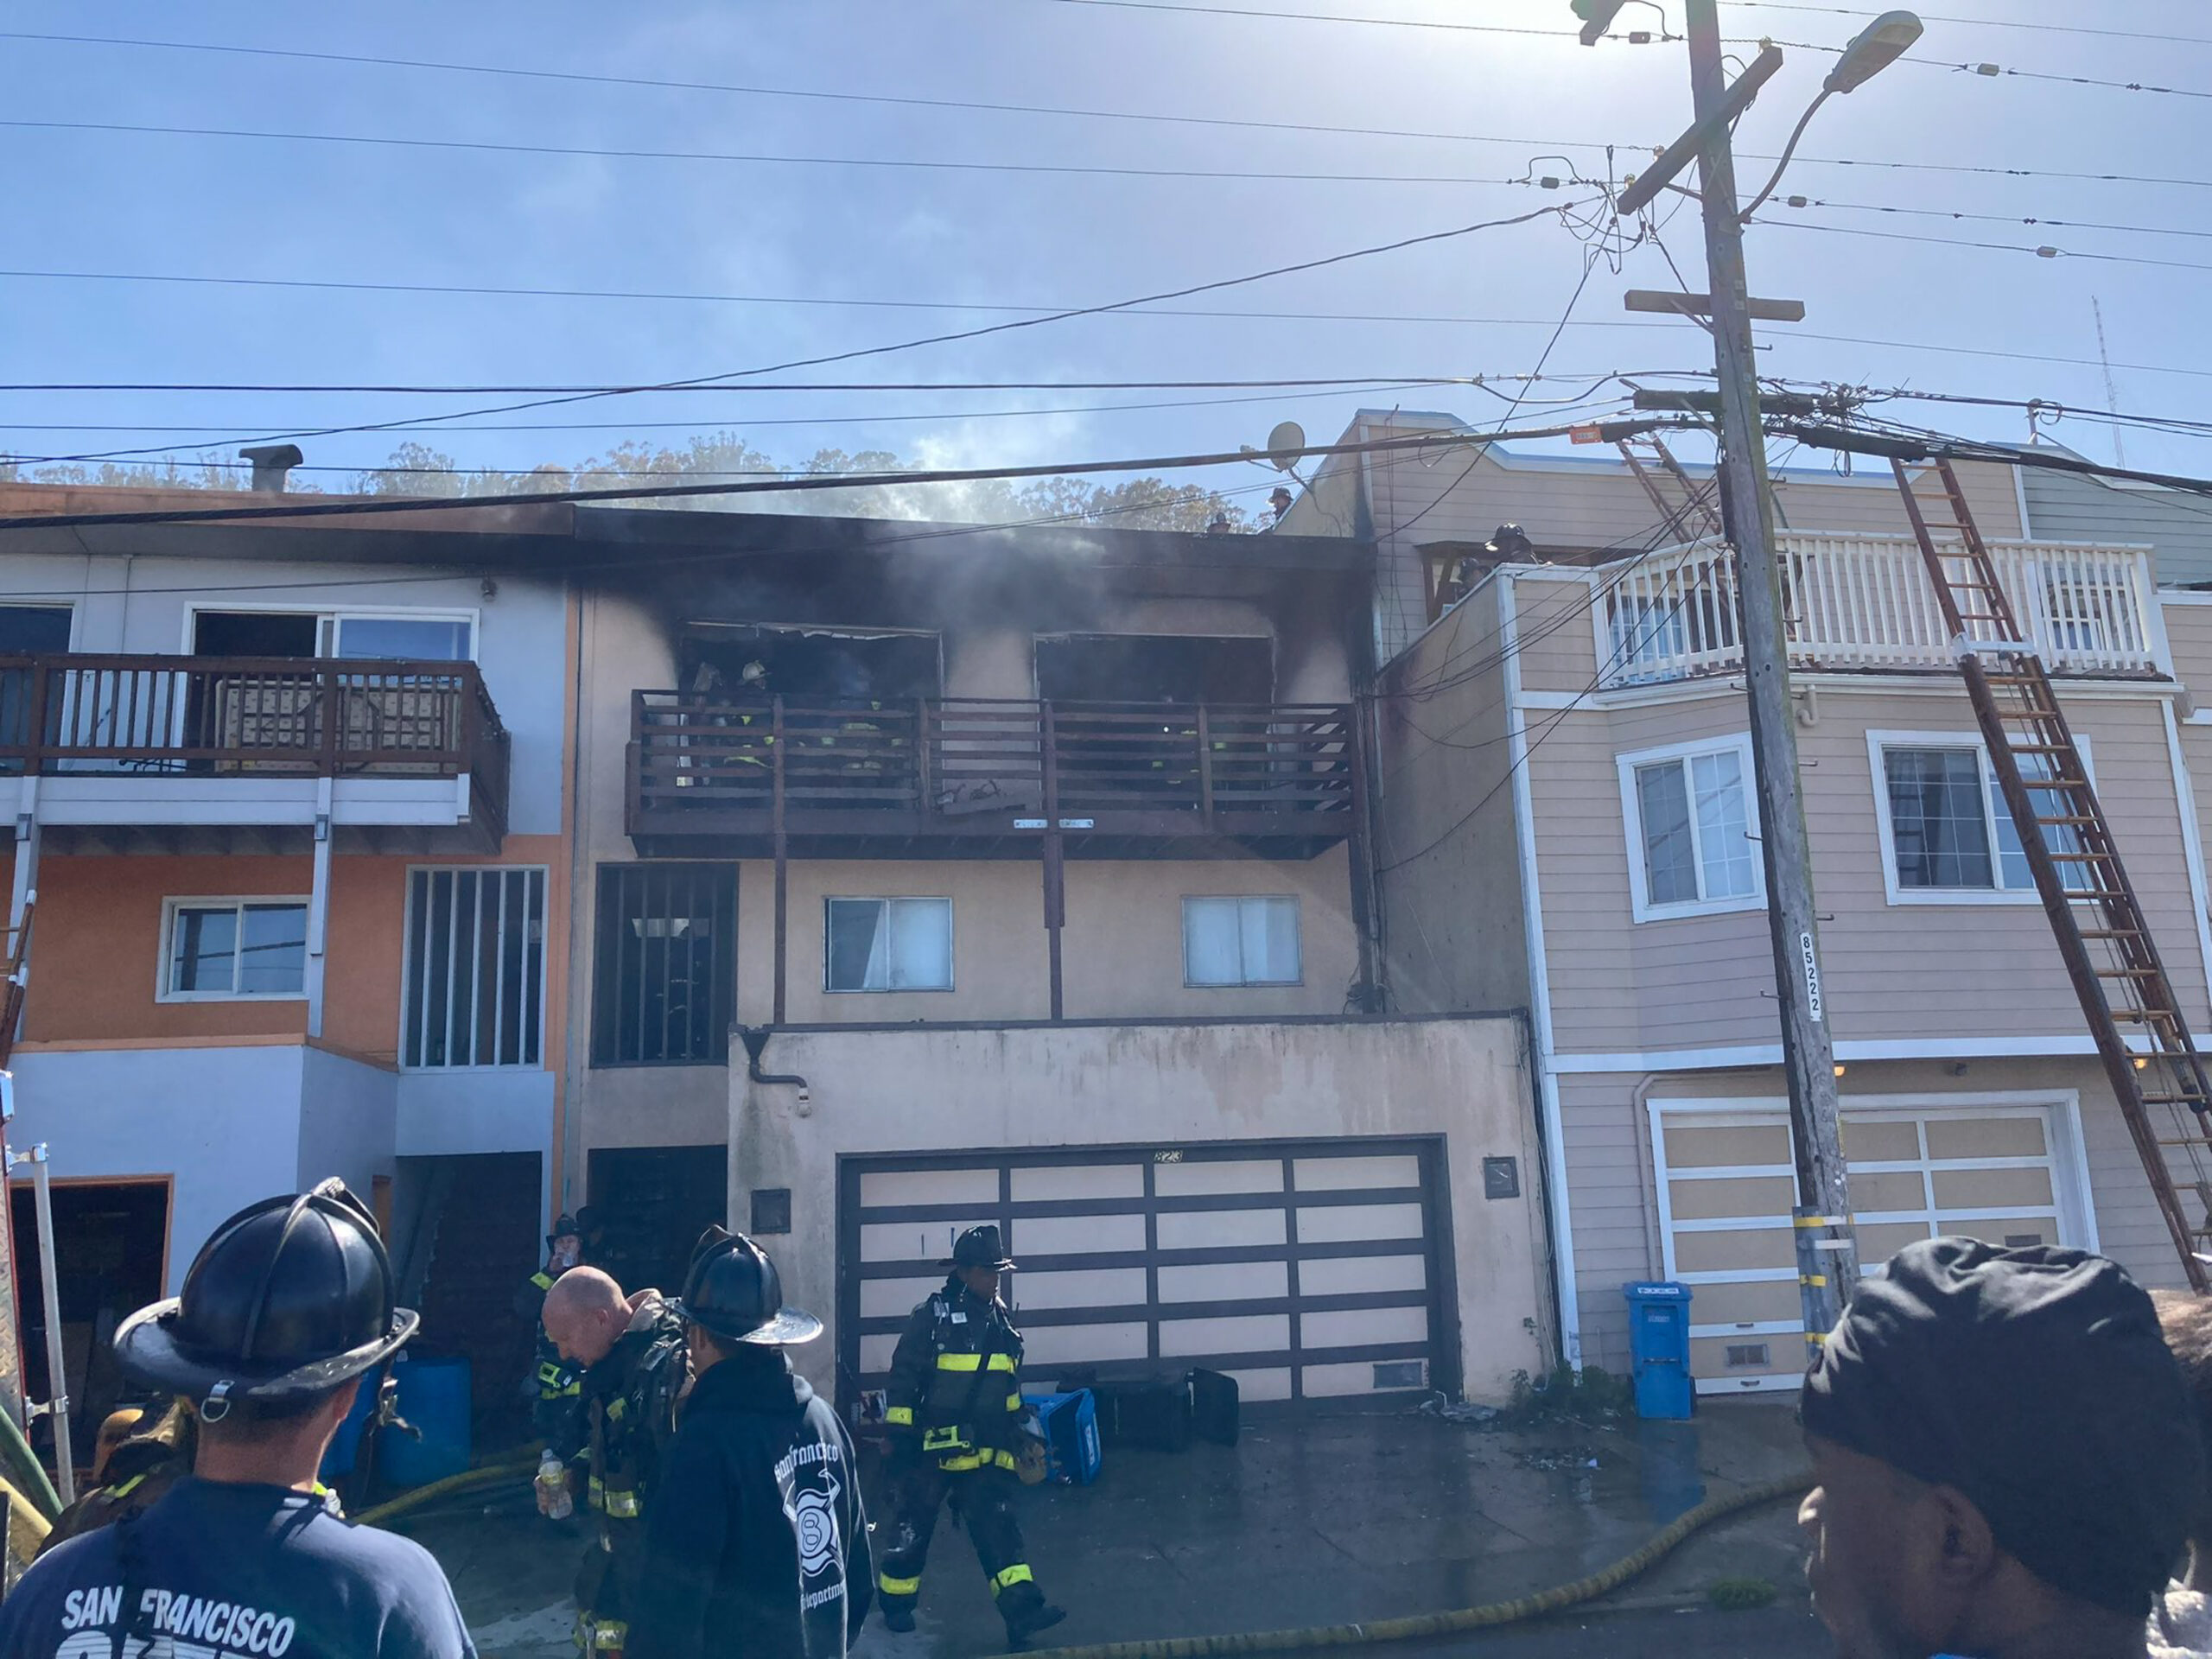 Young San Francisco Football Star’s House Burns Down, Family Dog Dies